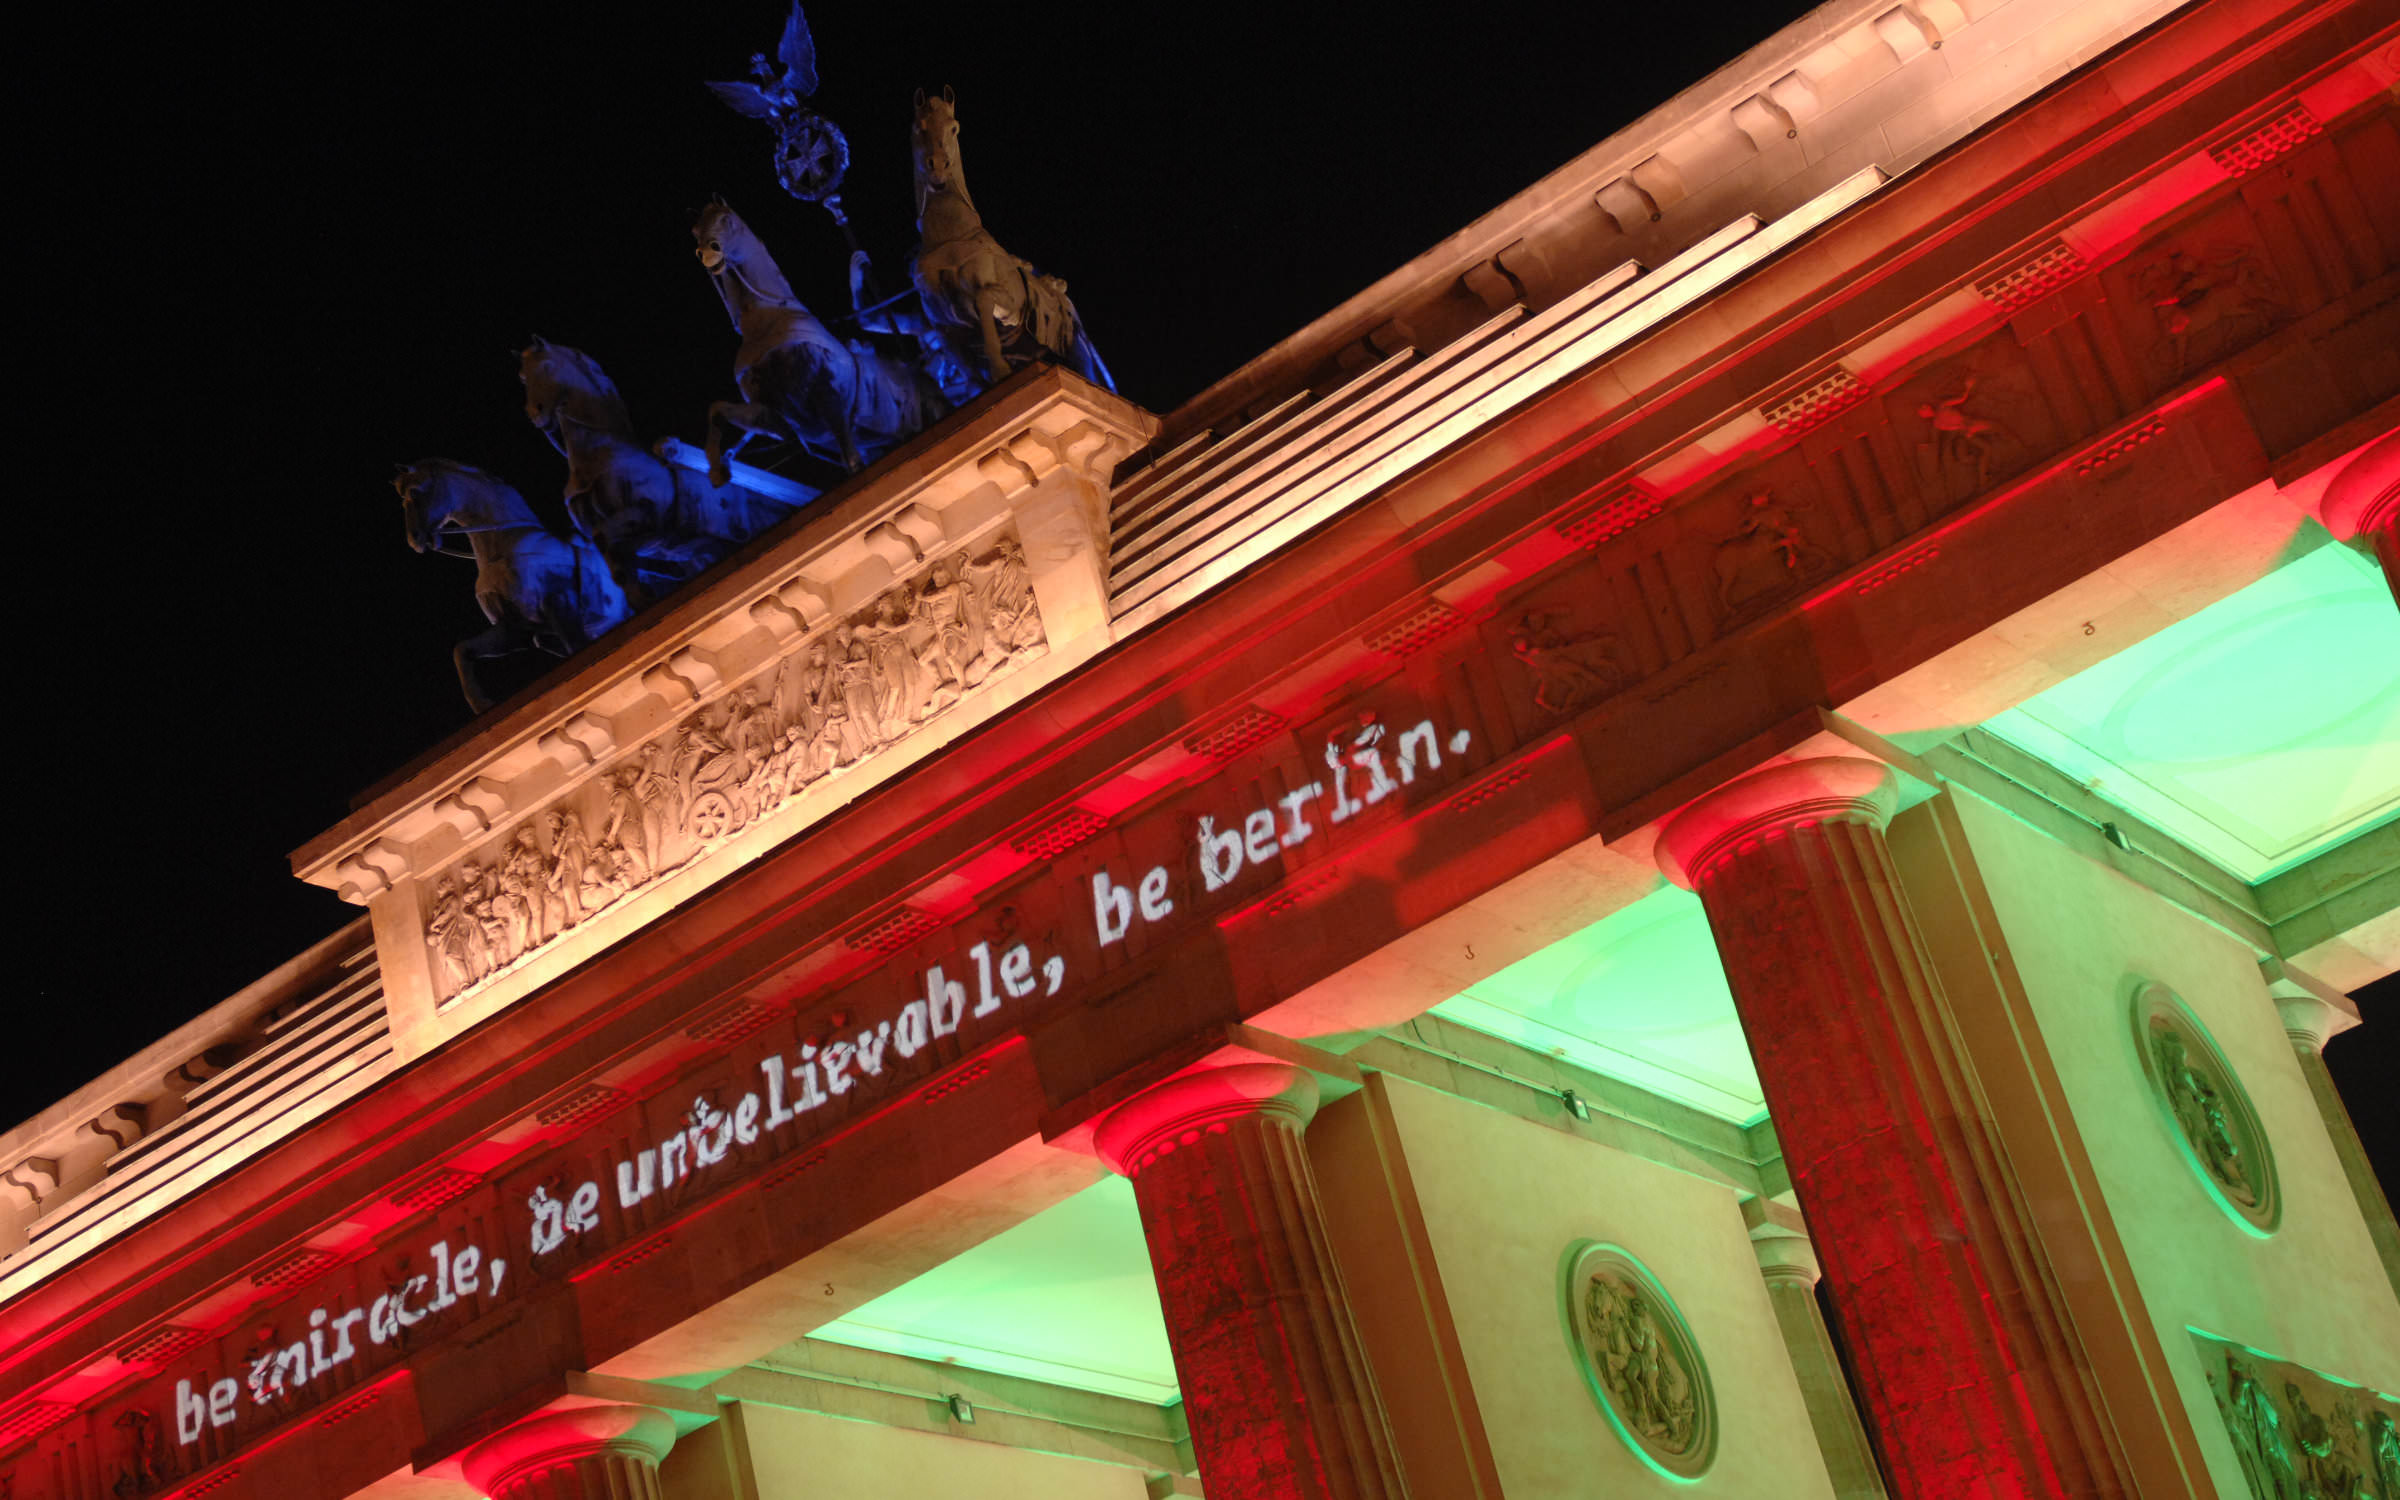 Change Letter (yet unreleased) in use as Berlin’s corporate typeface – Brandenburg Gate